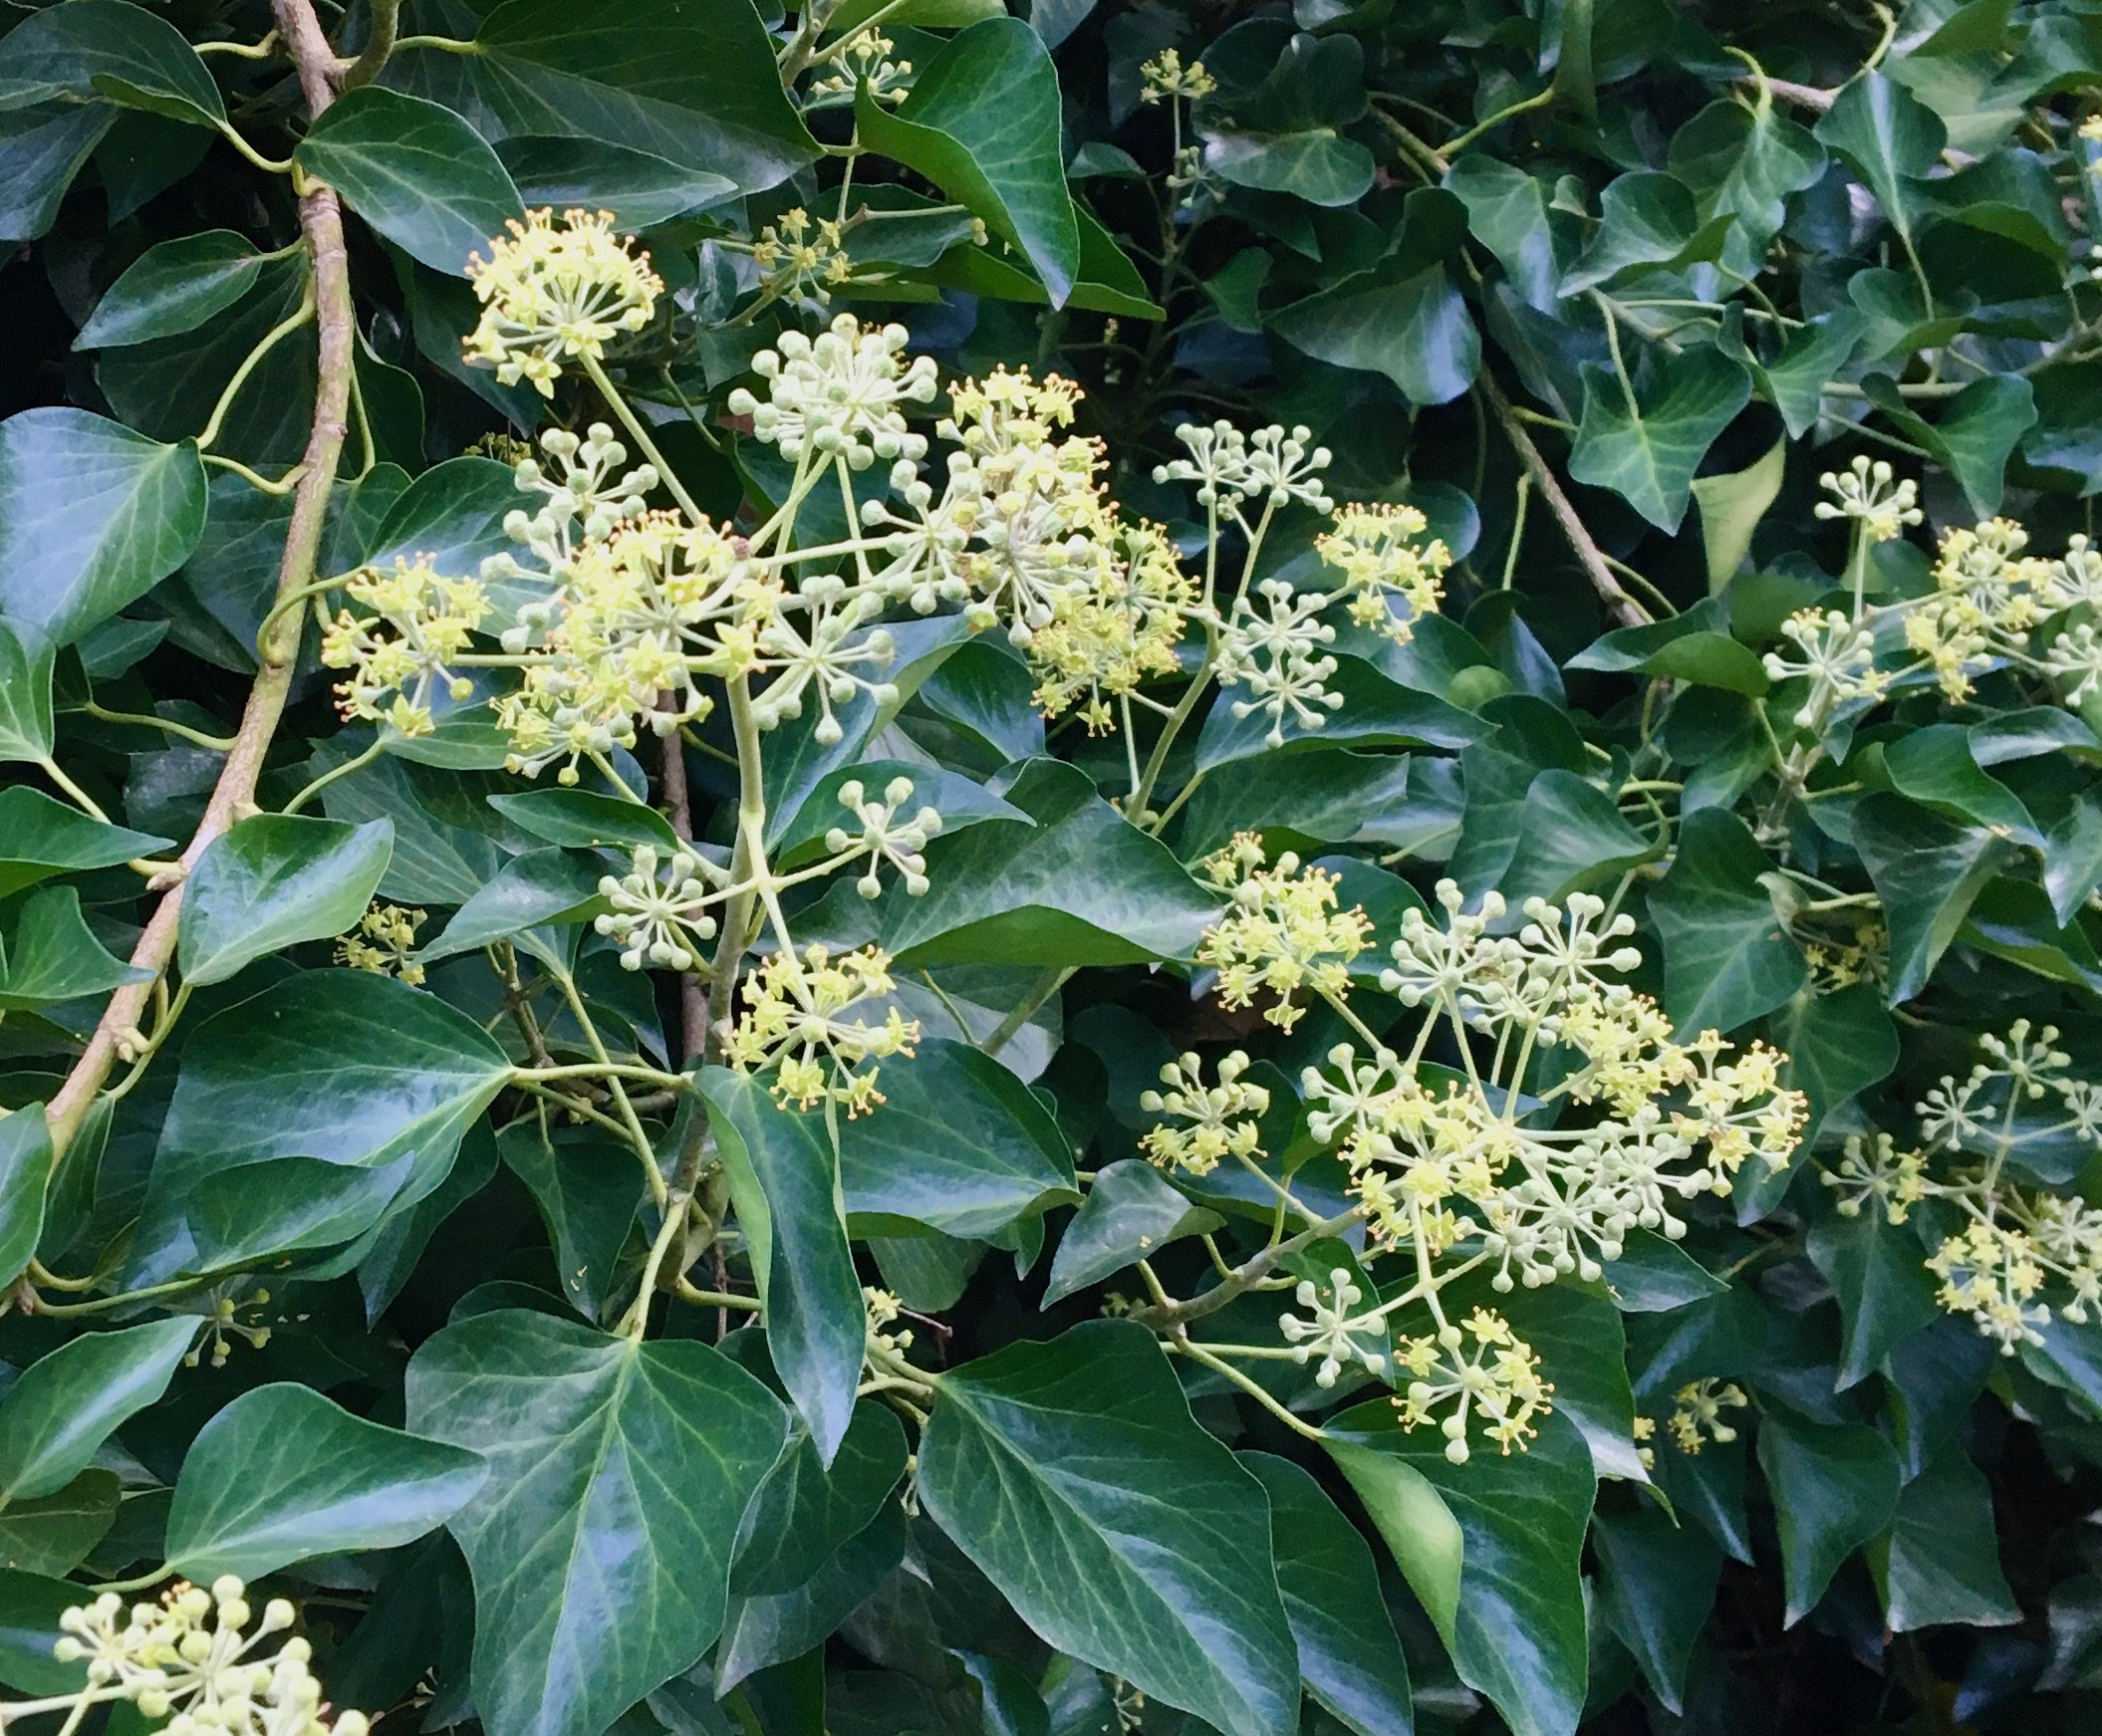 The Scientific Name is Hedera helix var. helix. You will likely hear them called English Ivy, Common Ivy. This picture shows the Clusters of greenish-white flowers develop when the vines climb into sunlight. of Hedera helix var. helix